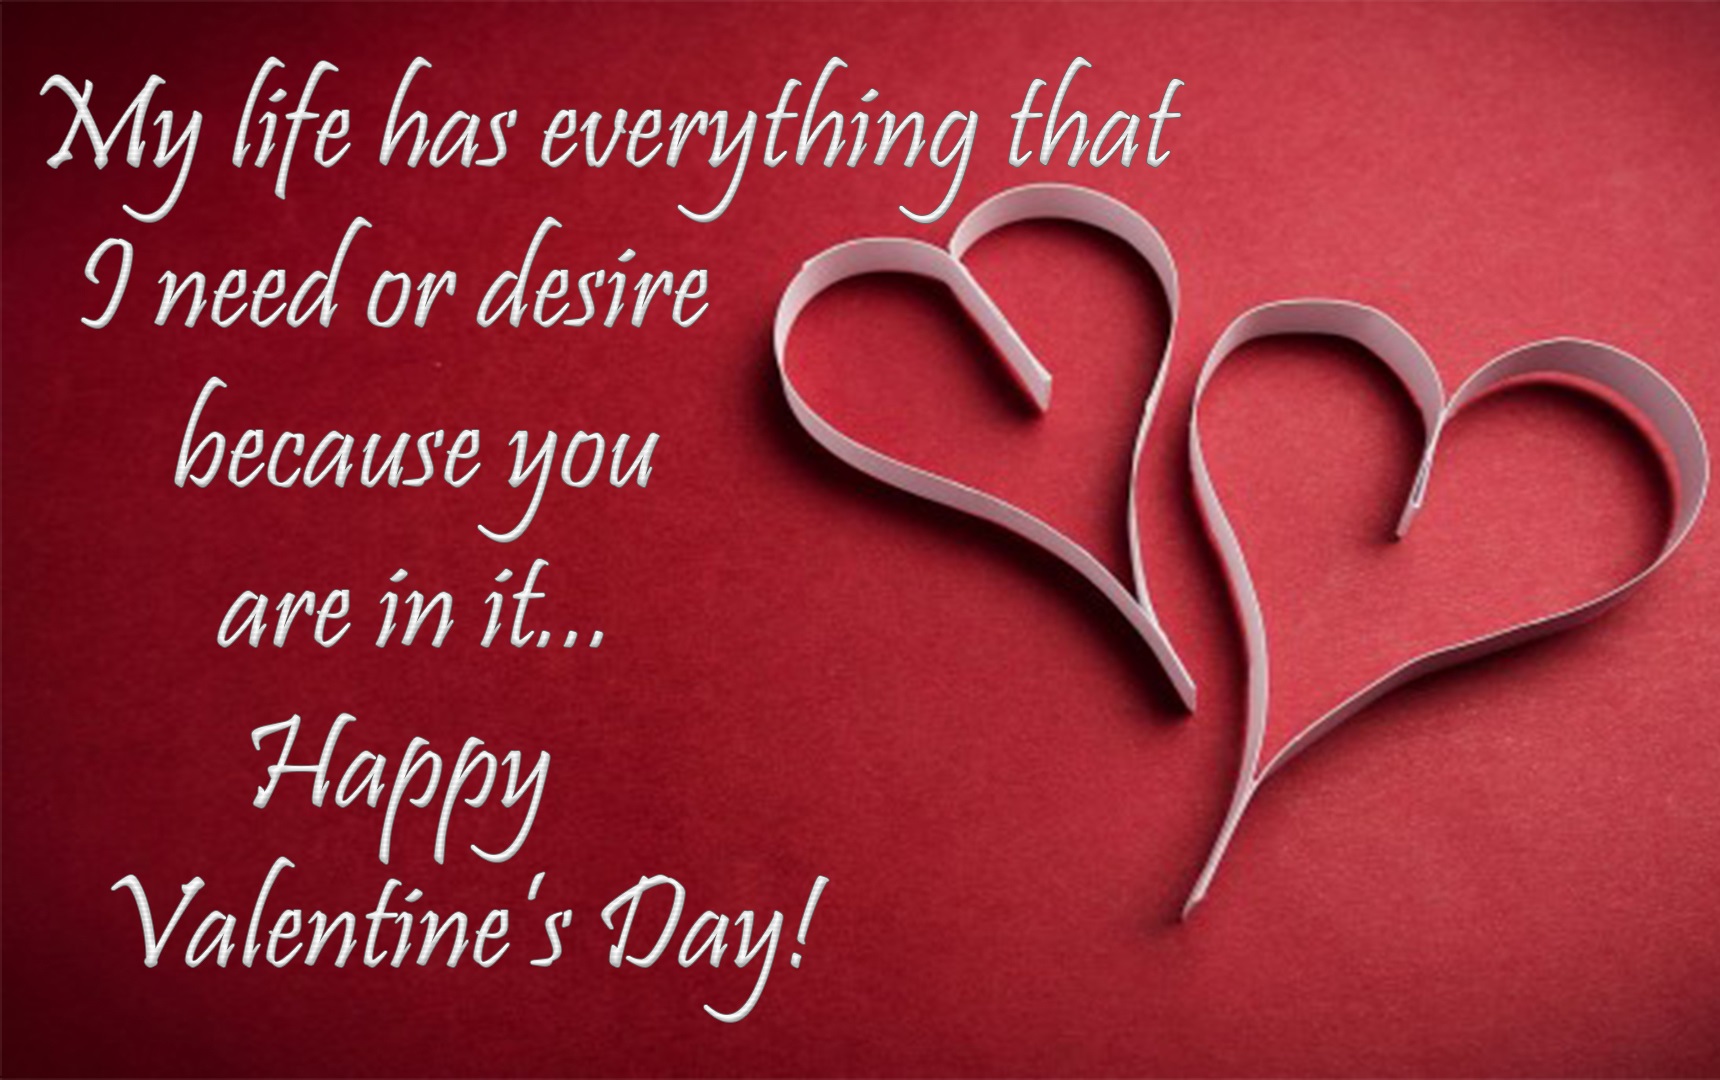 happy valentines day wishes hd image